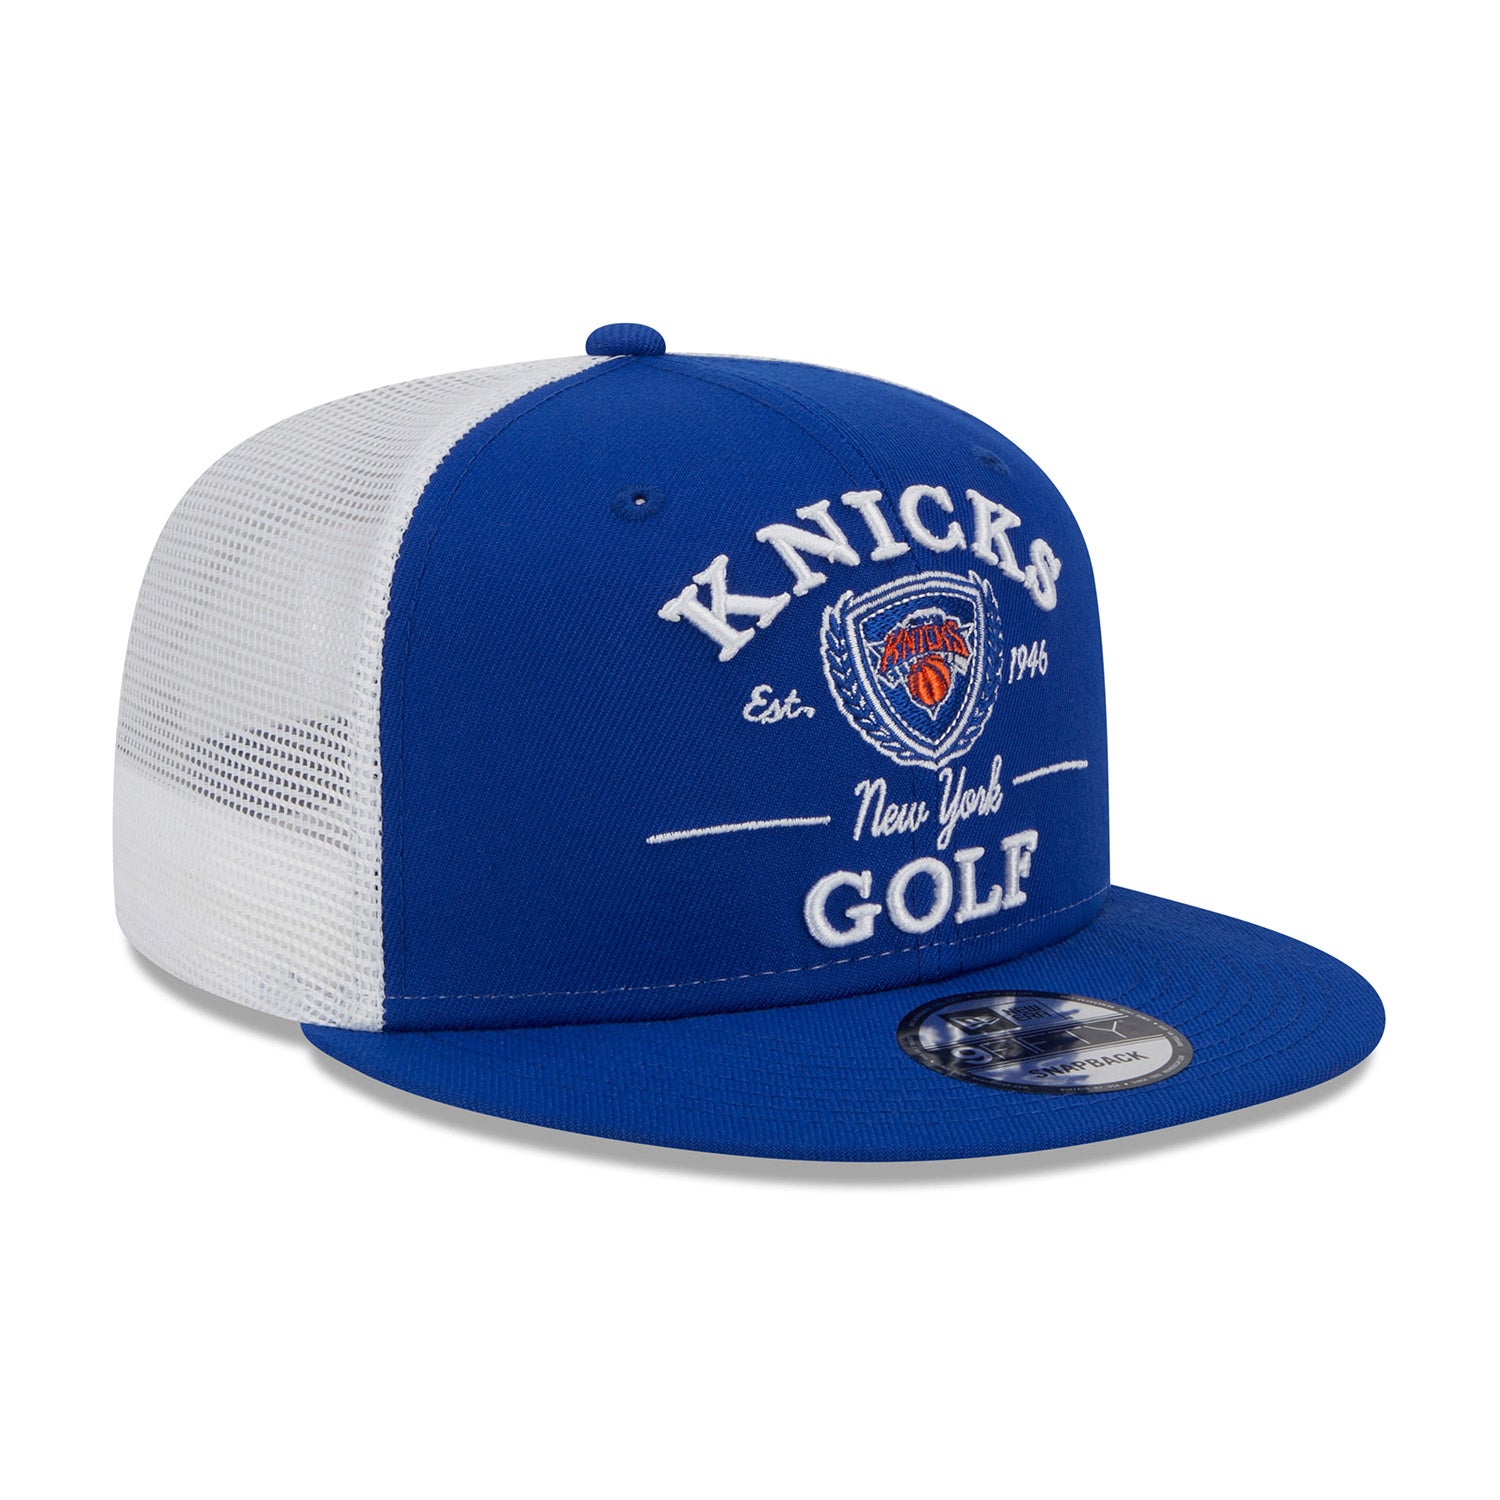 New Era Knicks Golf Club Meshback Snapback Hat In Blue & White - Angled Right Side View